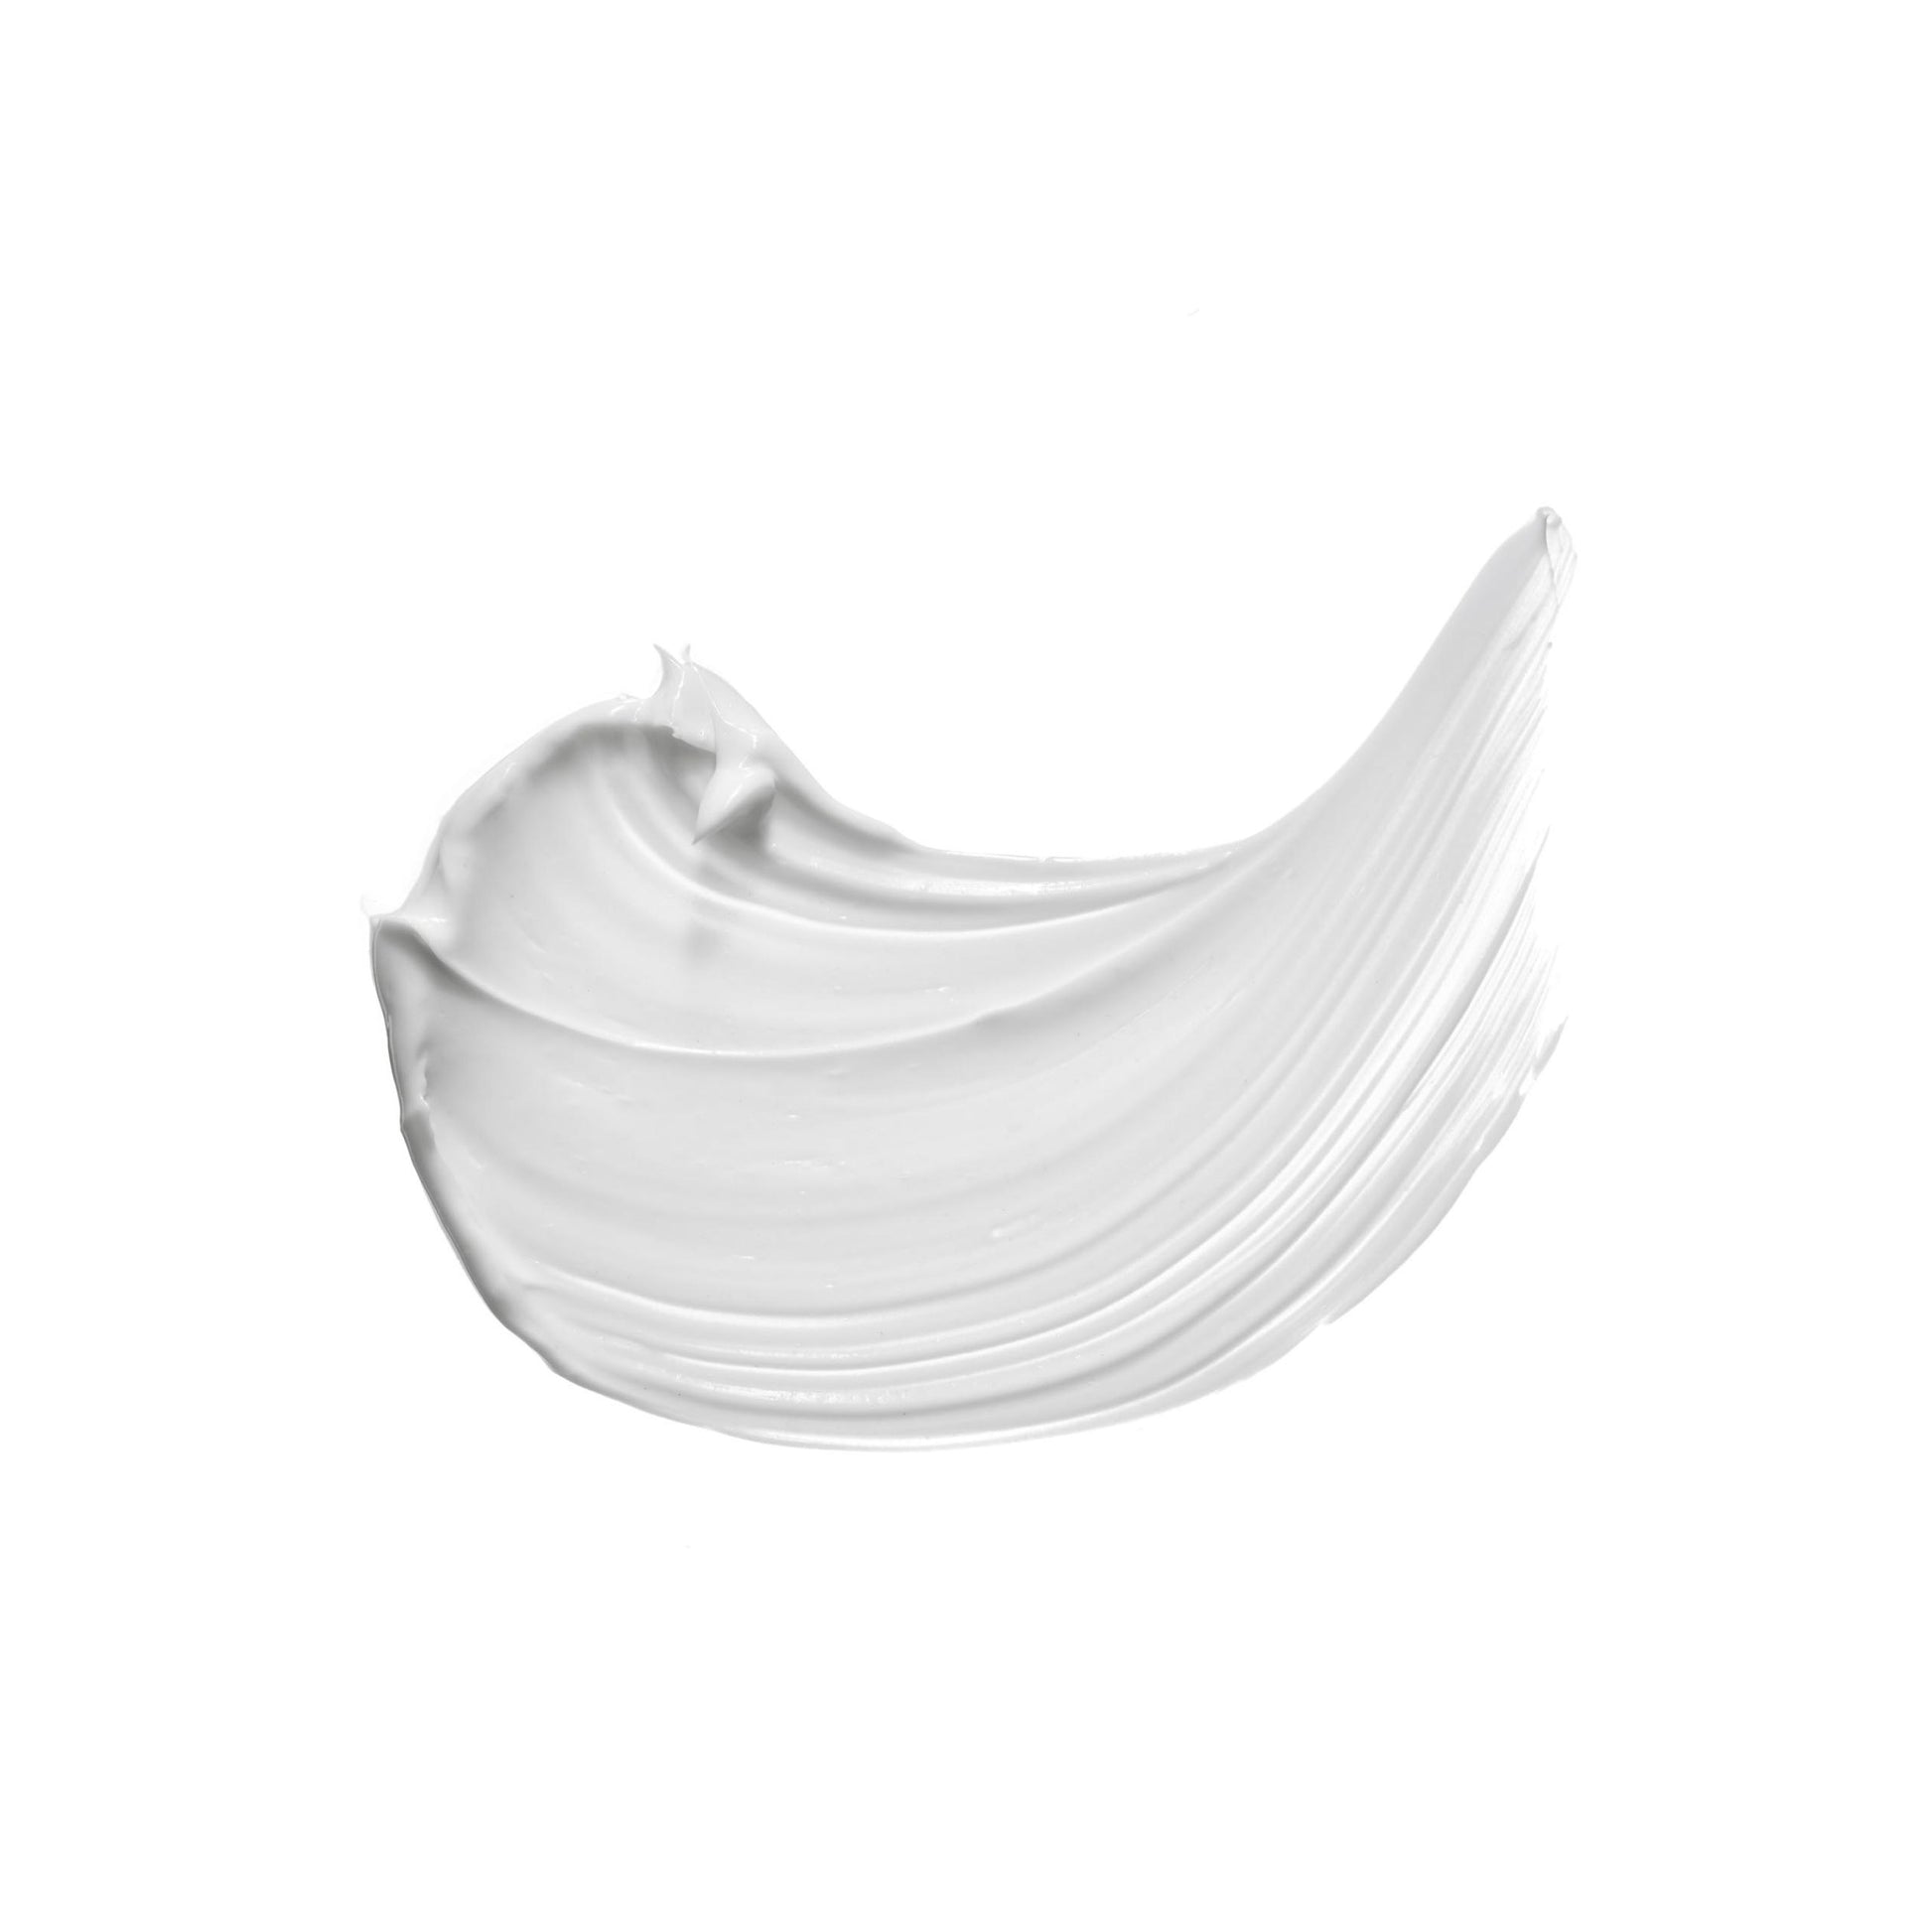 White Clay Face Mask-Cellular Cosmetics Private Label Skin Care Australian Cosmetic Manufacture